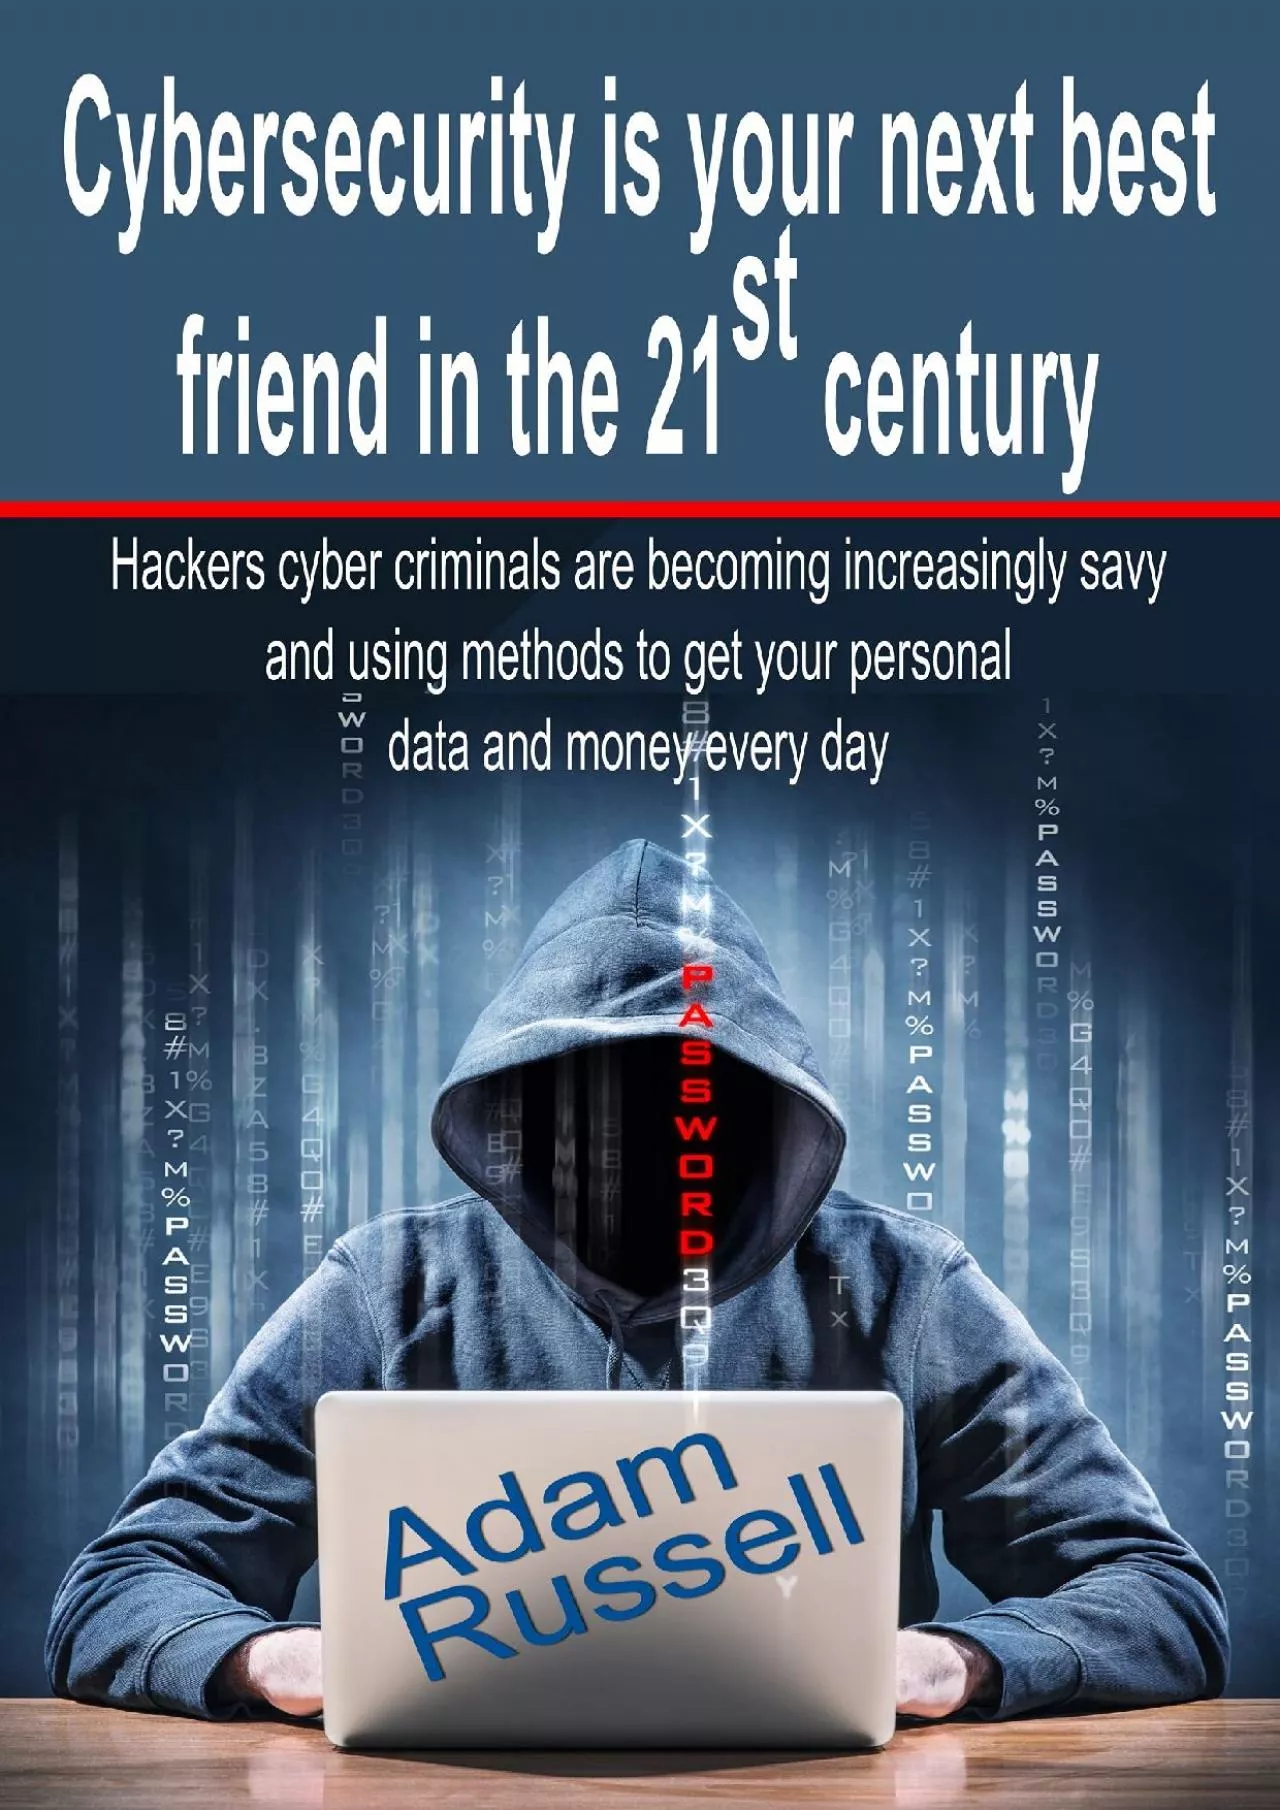 [READING BOOK]-Cybersecurity is your next best friend in the 21st century: Hackers cyber